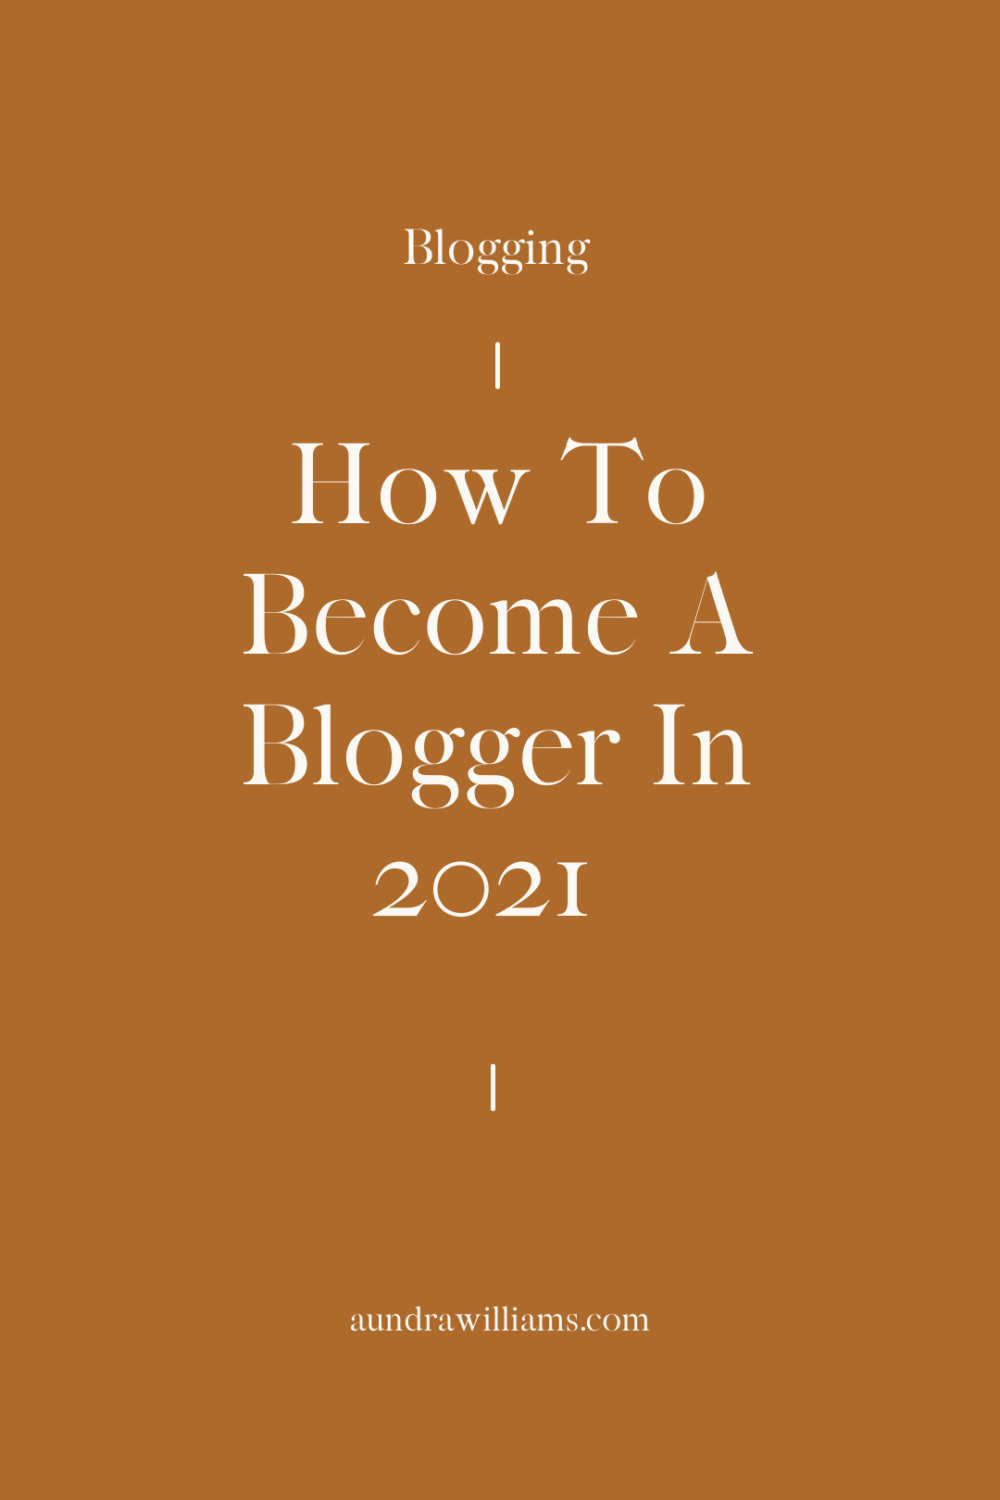 How To Become A Blogger In 2021